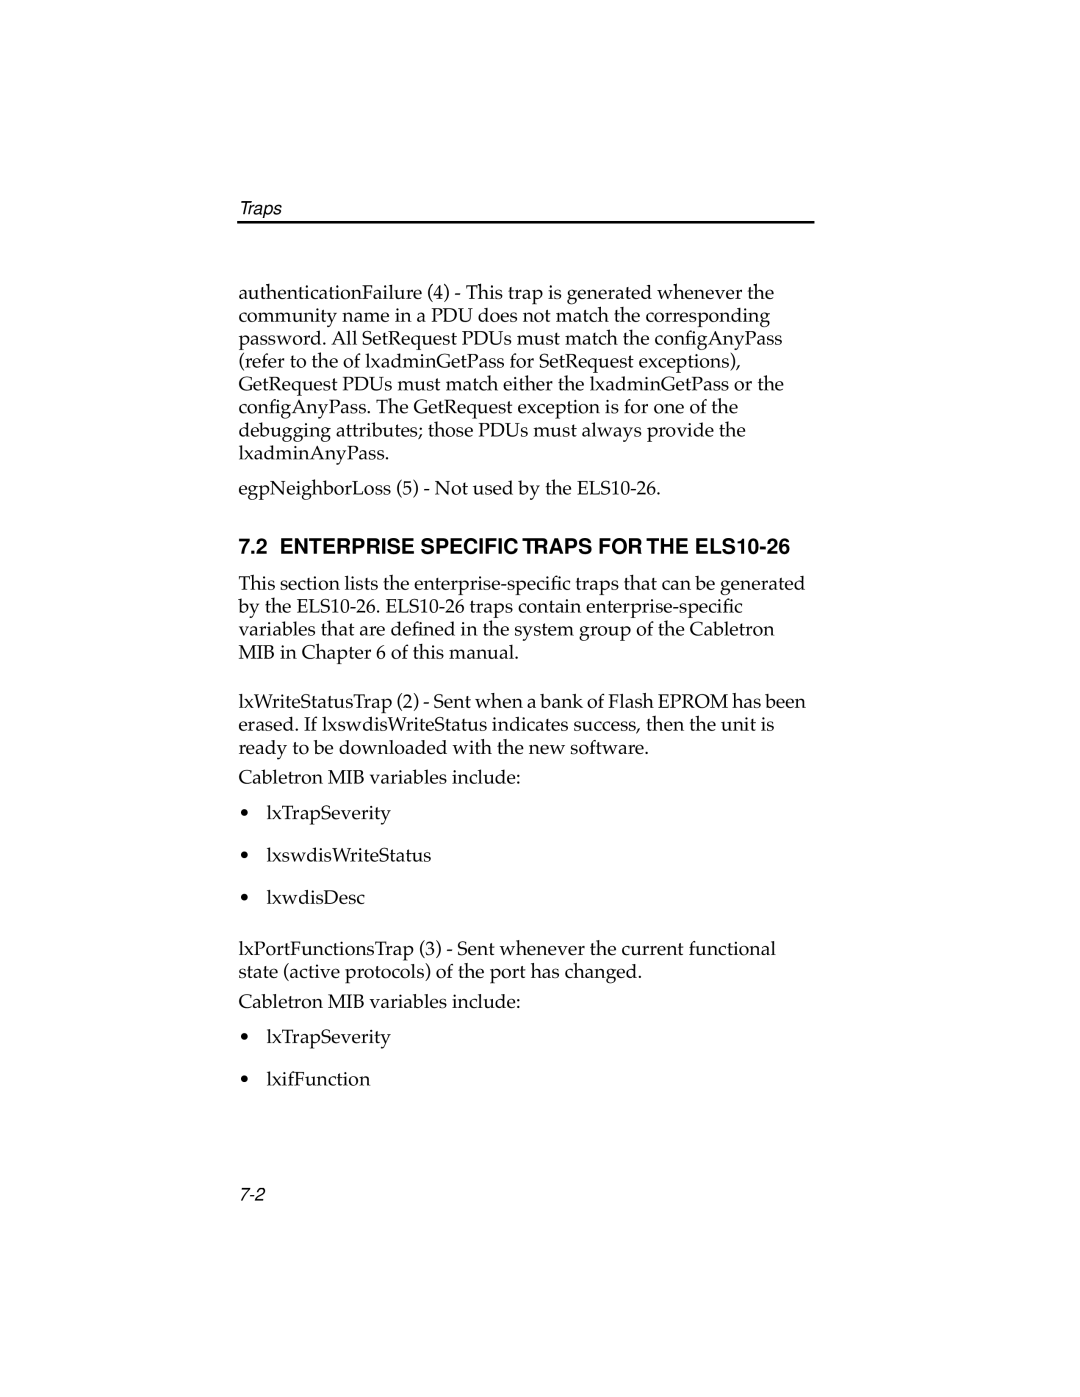 Cabletron Systems manual ENTERPRISE SPECIFIC TRAPS FOR THE ELS10-26 